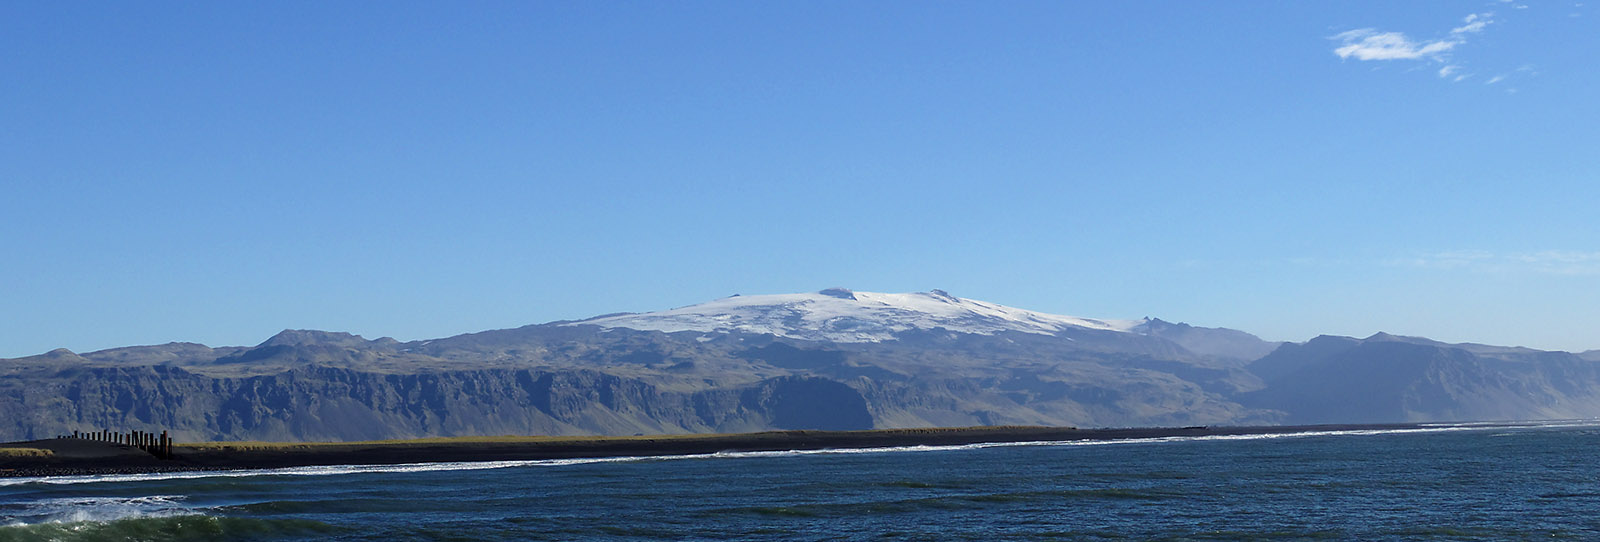 Eyjafjallajökull volcano viewed from the ferry boat to the Westman Islands.  This snow-covered volcano erupted in 2010 with heavy ash clouds causing disruption of air travel across Western Europe.